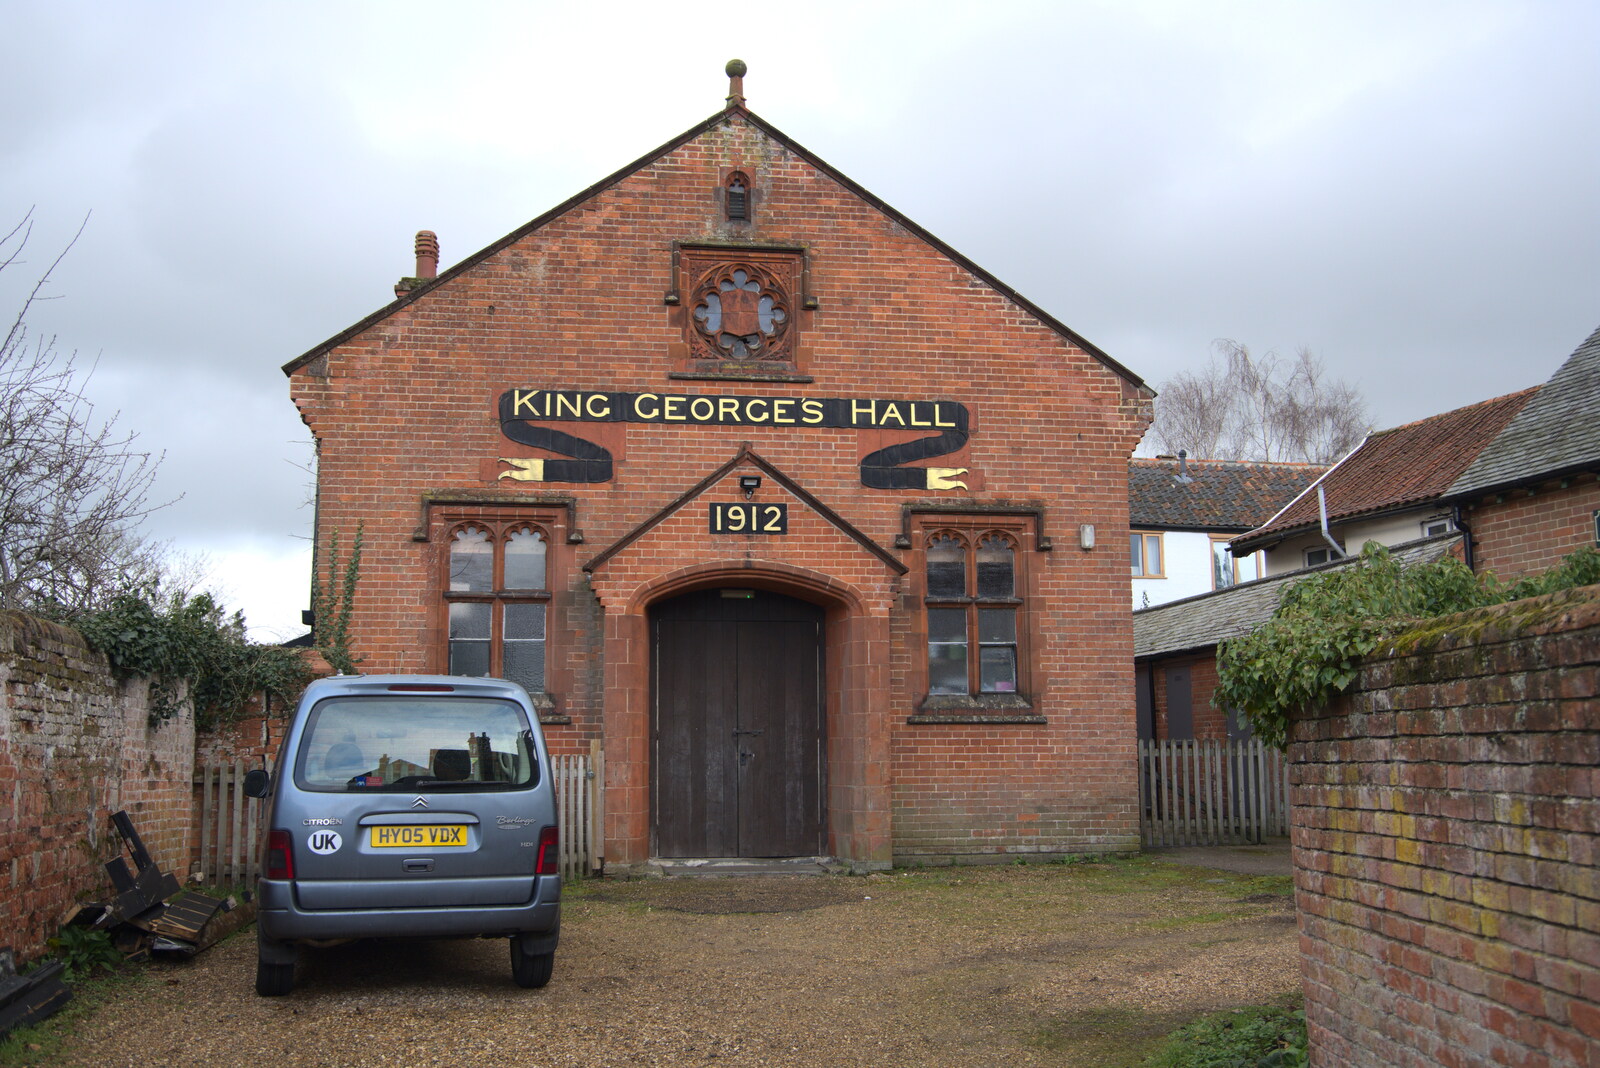 Lunch in Harleston, Norfolk - 1st March 2023: King George's Hall, from 1912